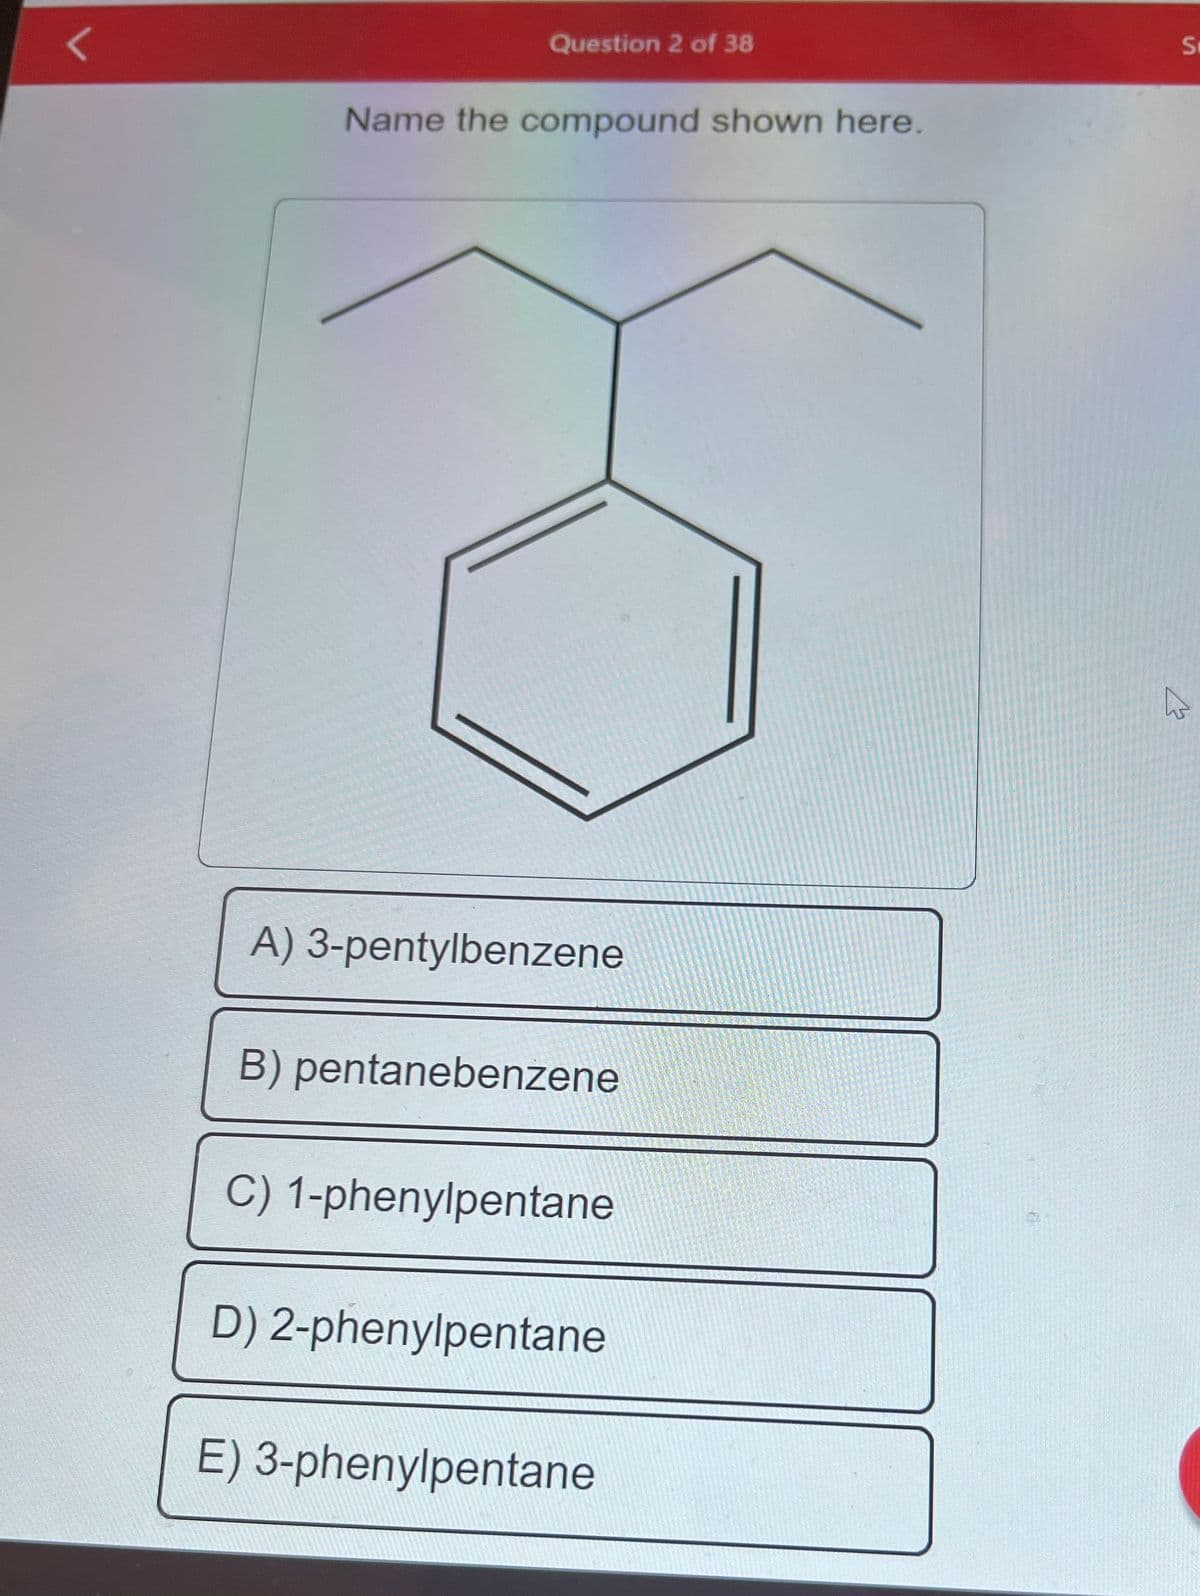 Question 2 of 38
Name the compound shown here.
A) 3-pentylbenzene
B) pentanebenzene
C) 1-phenylpentane
D) 2-phenylpentane
E) 3-phenylpentane
S